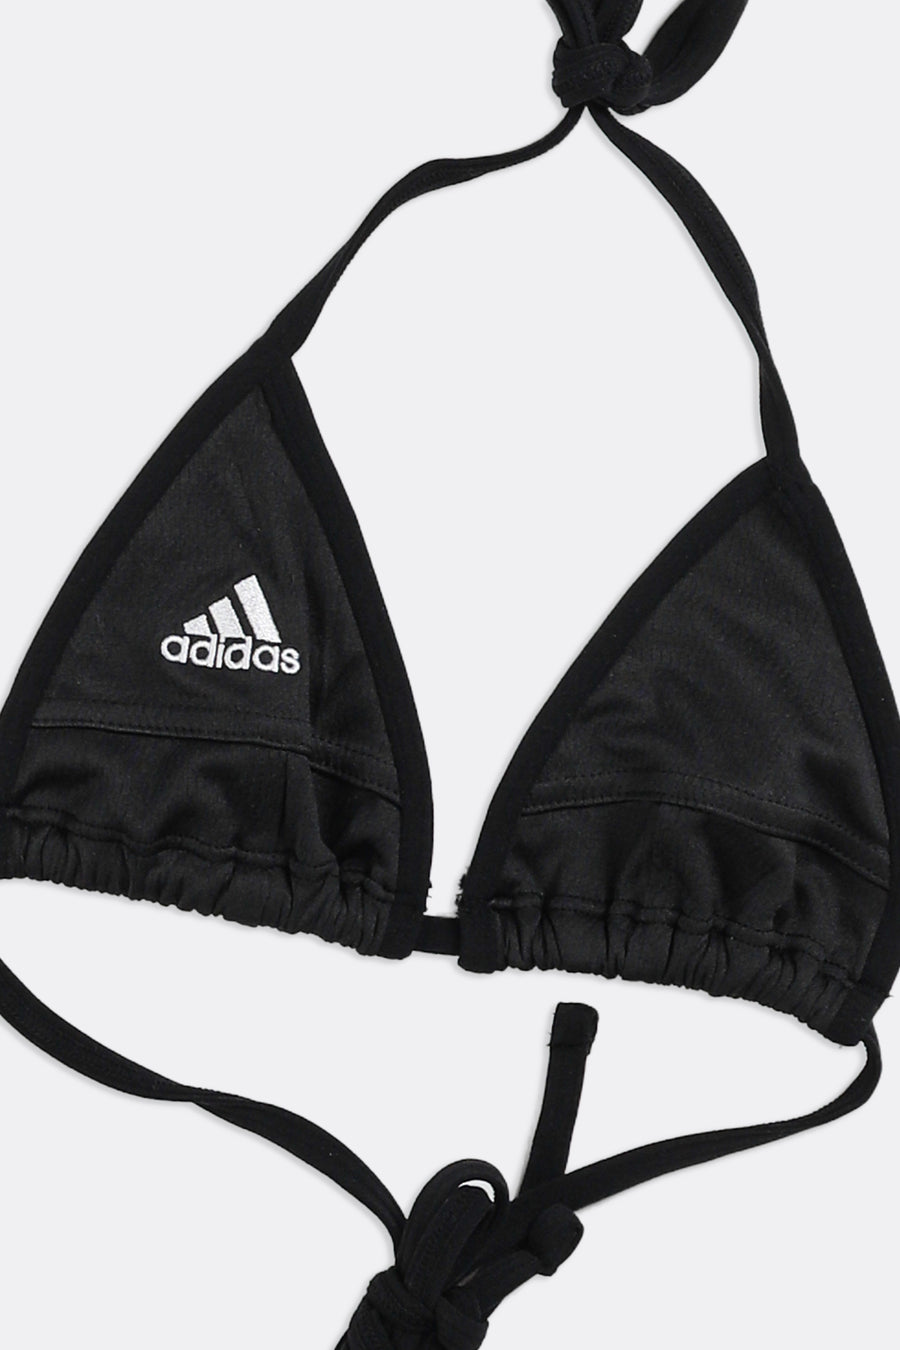 Rework Adidas Athletic Triangle Top - XS